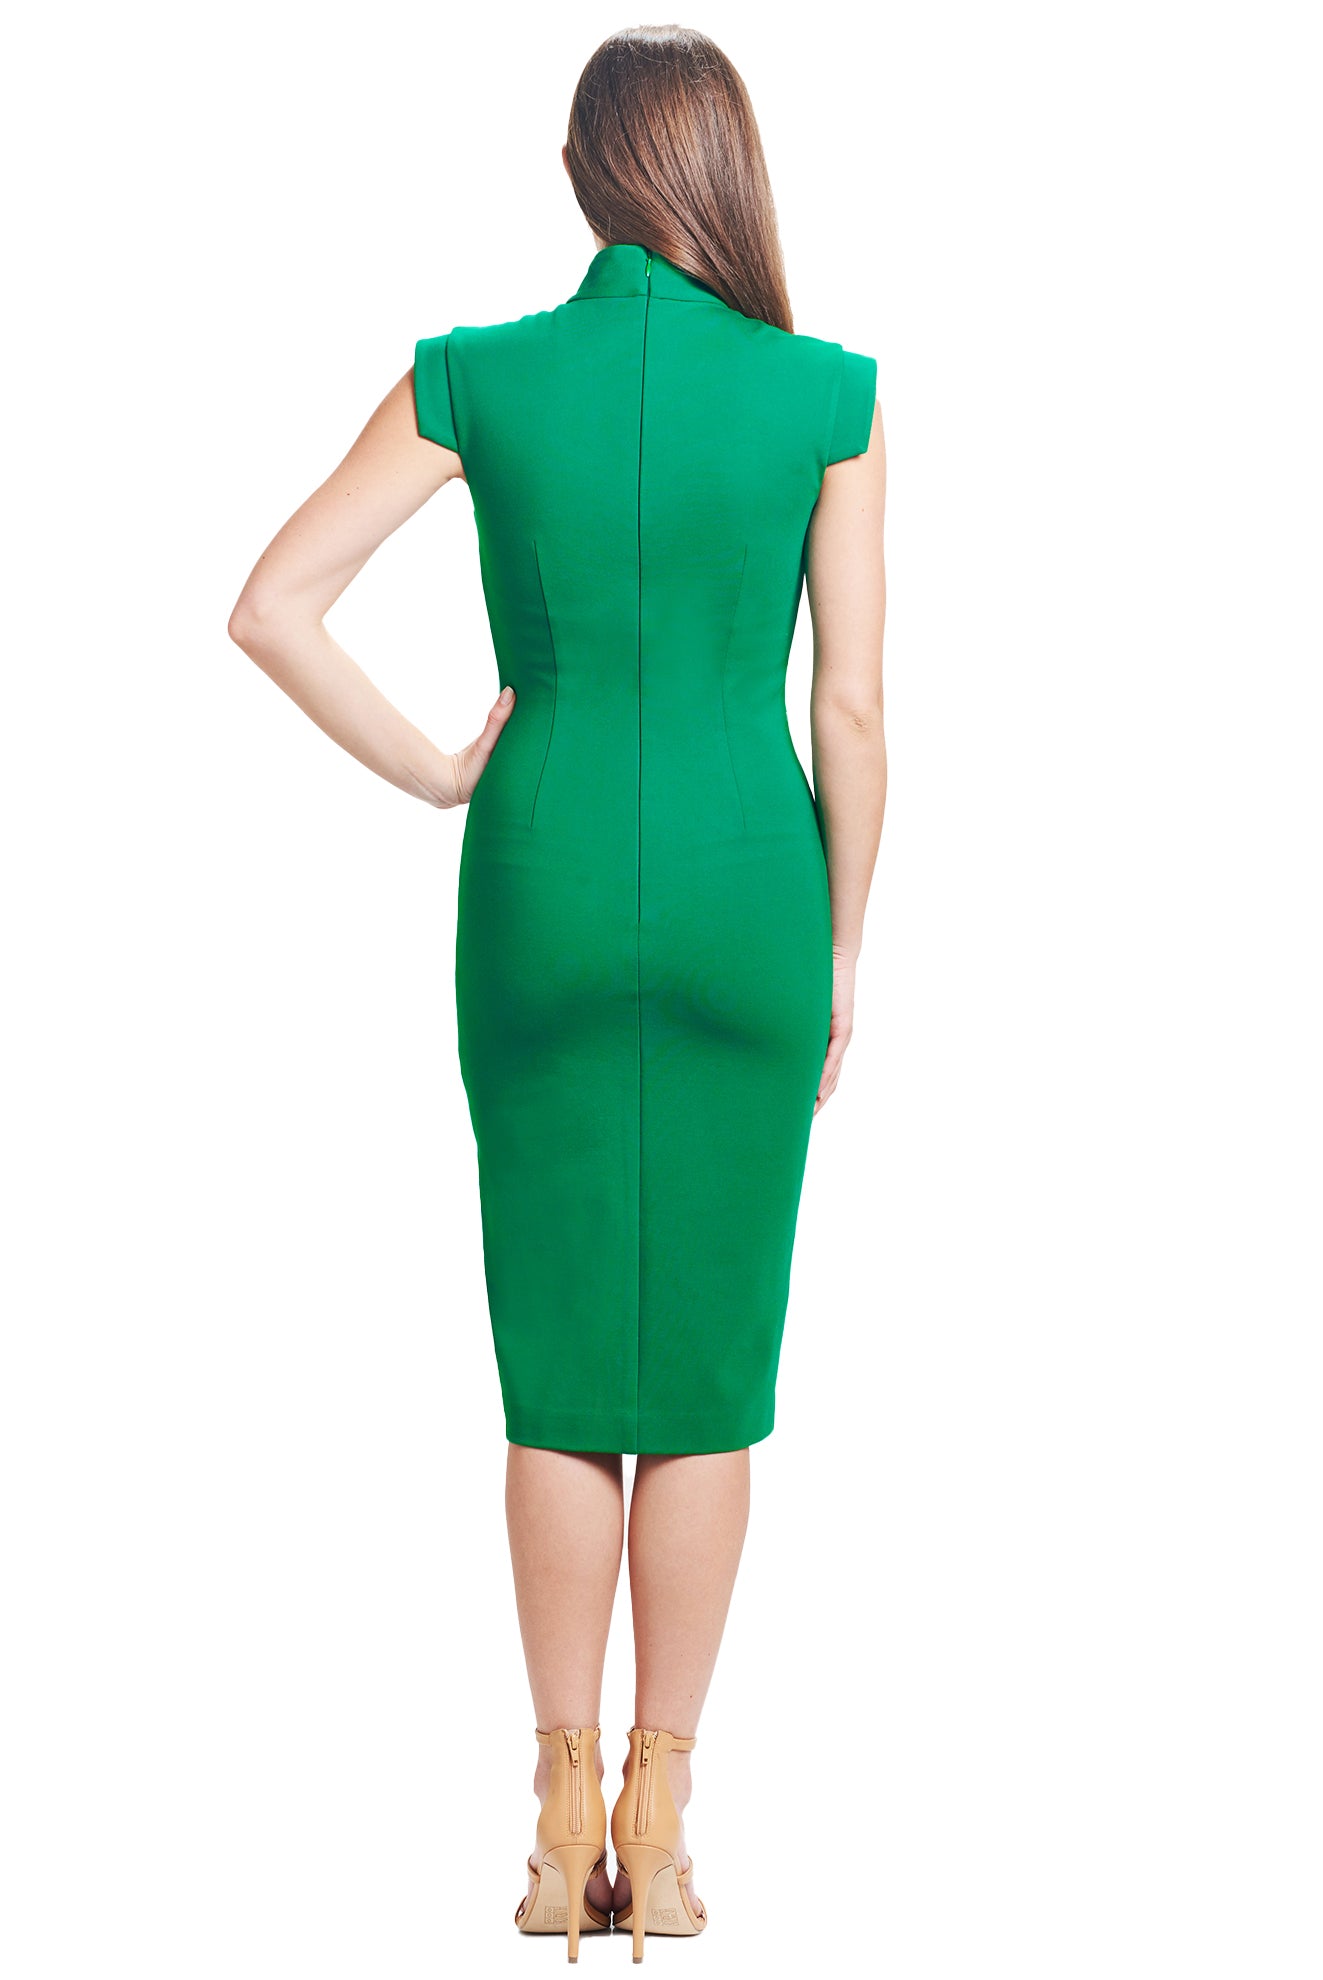 Back view of model wearing solid emerald green knit Ponte sleeveless midi dress